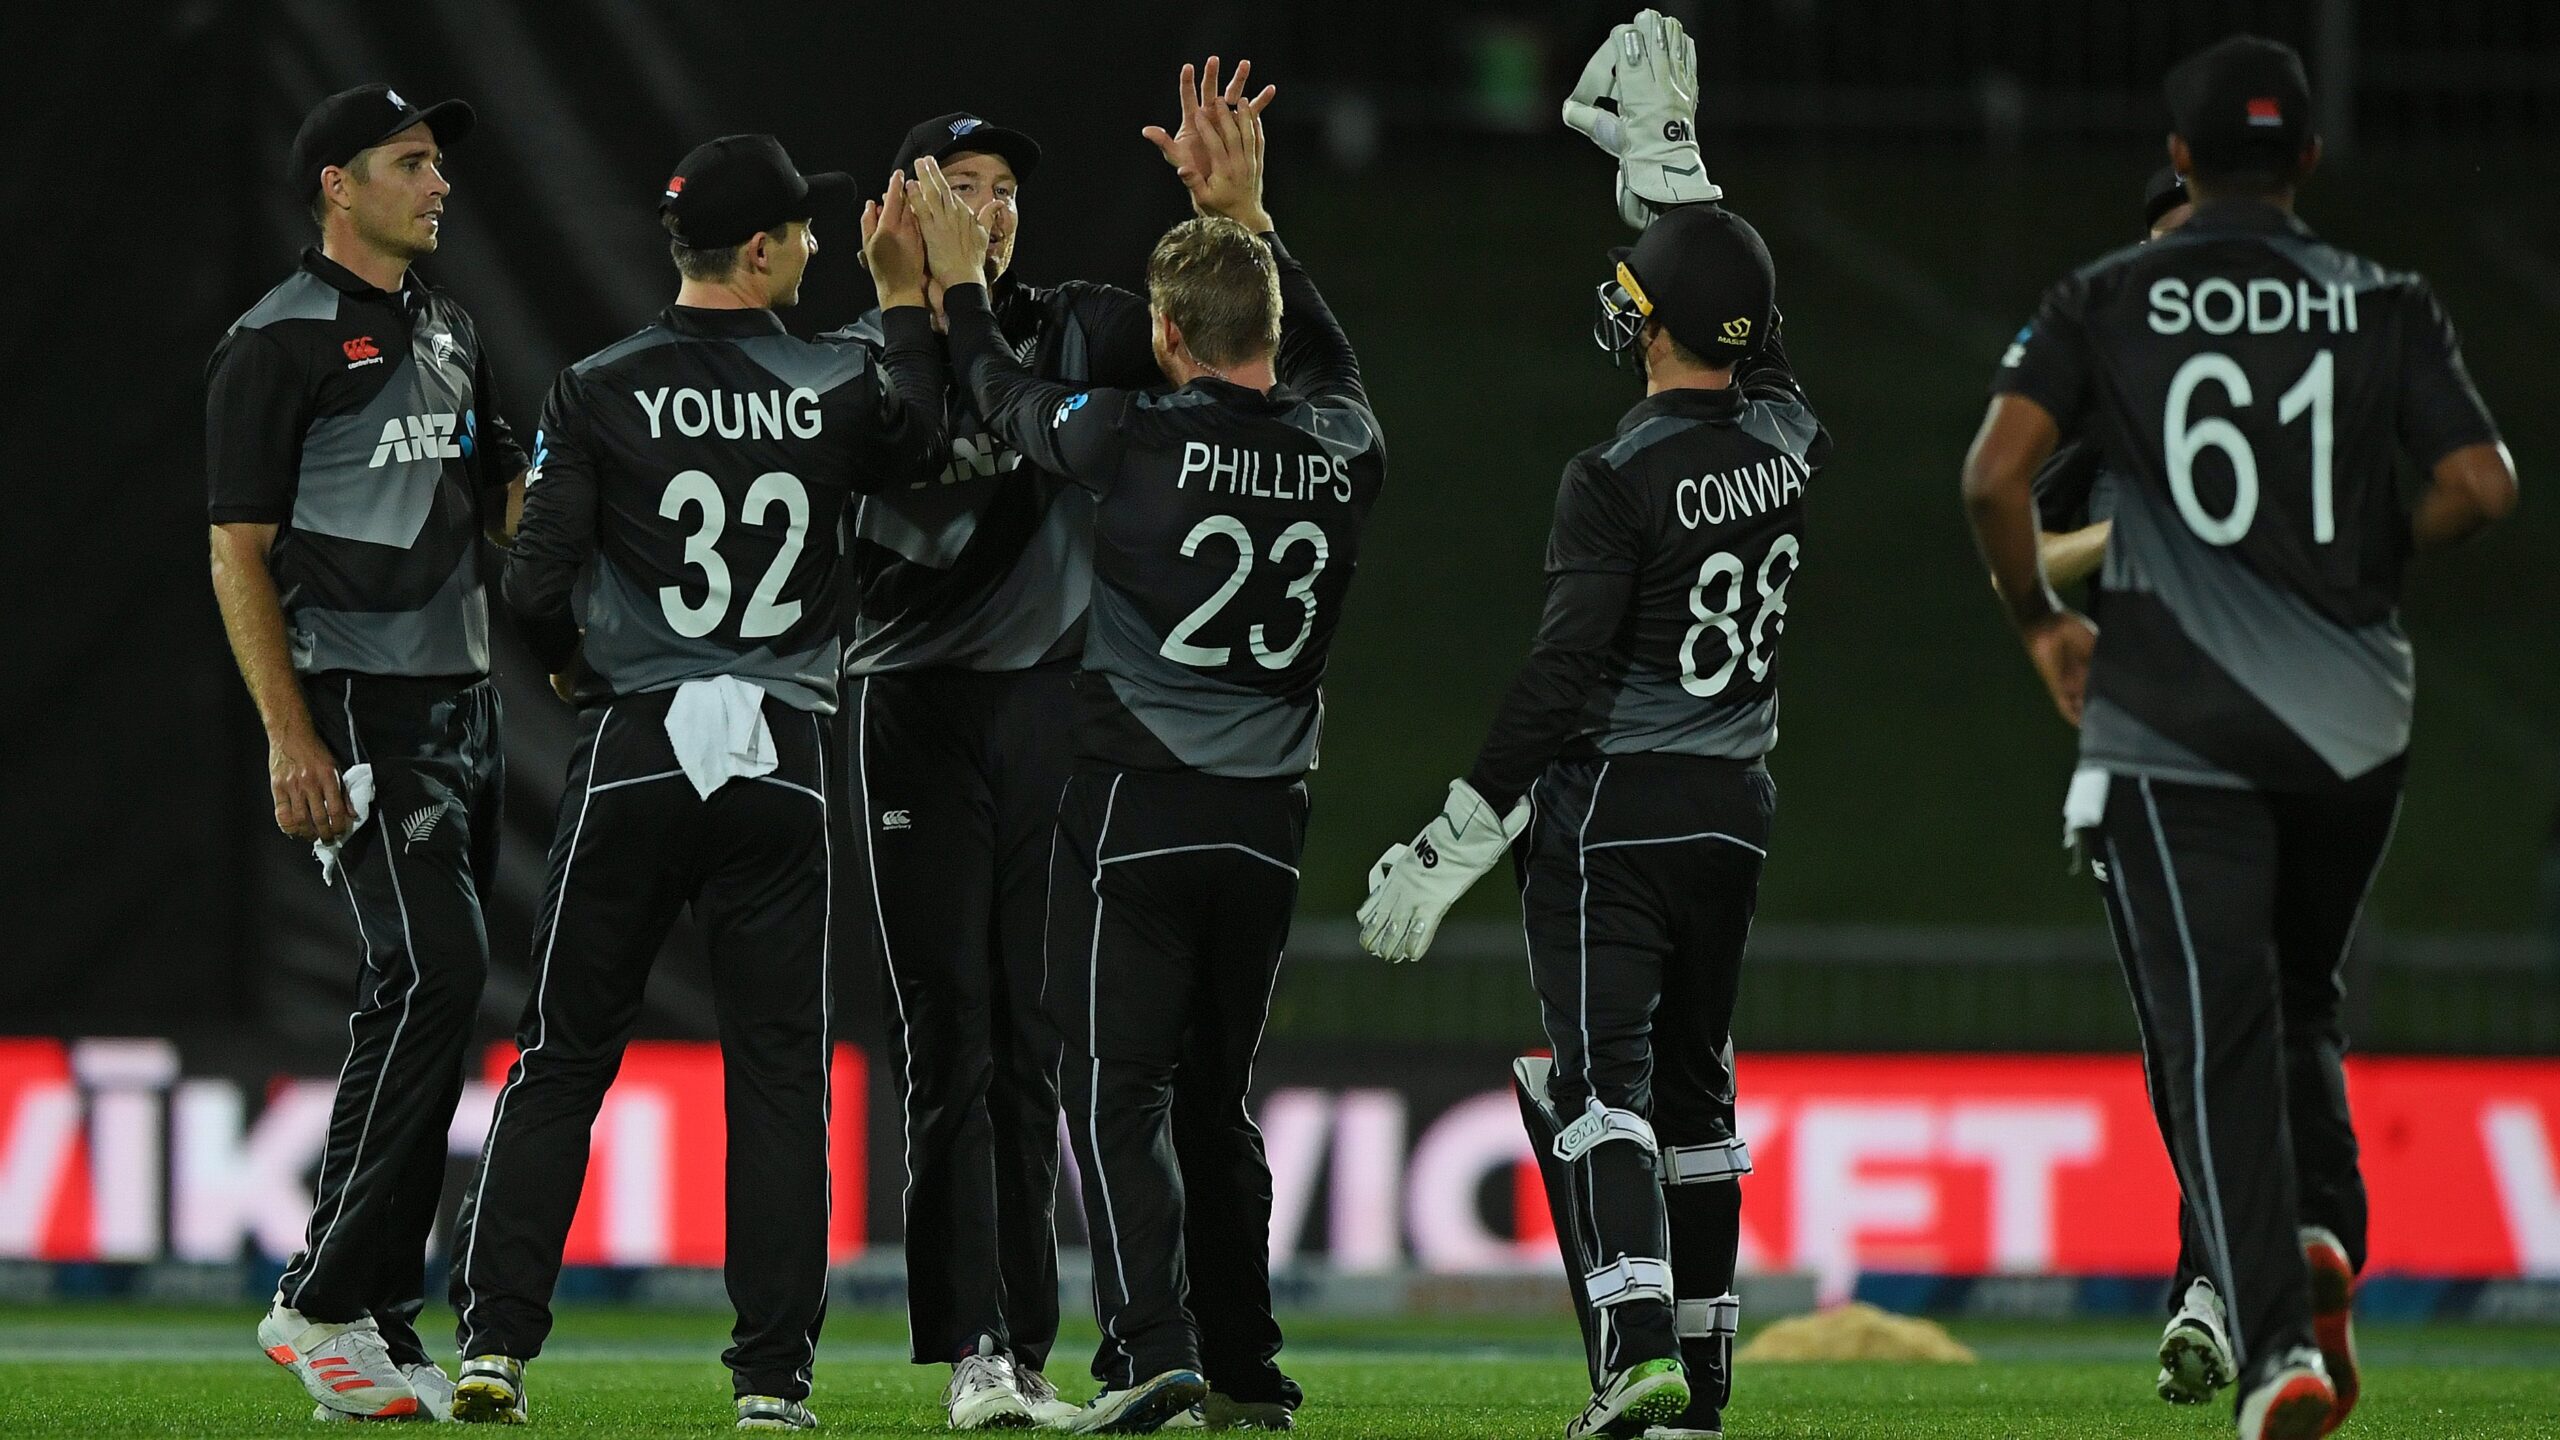 New Zealand vs Bangladesh 2021, 2nd T20I: New Zealand Win Series After Rain-Interrupted Revised Target Confusion